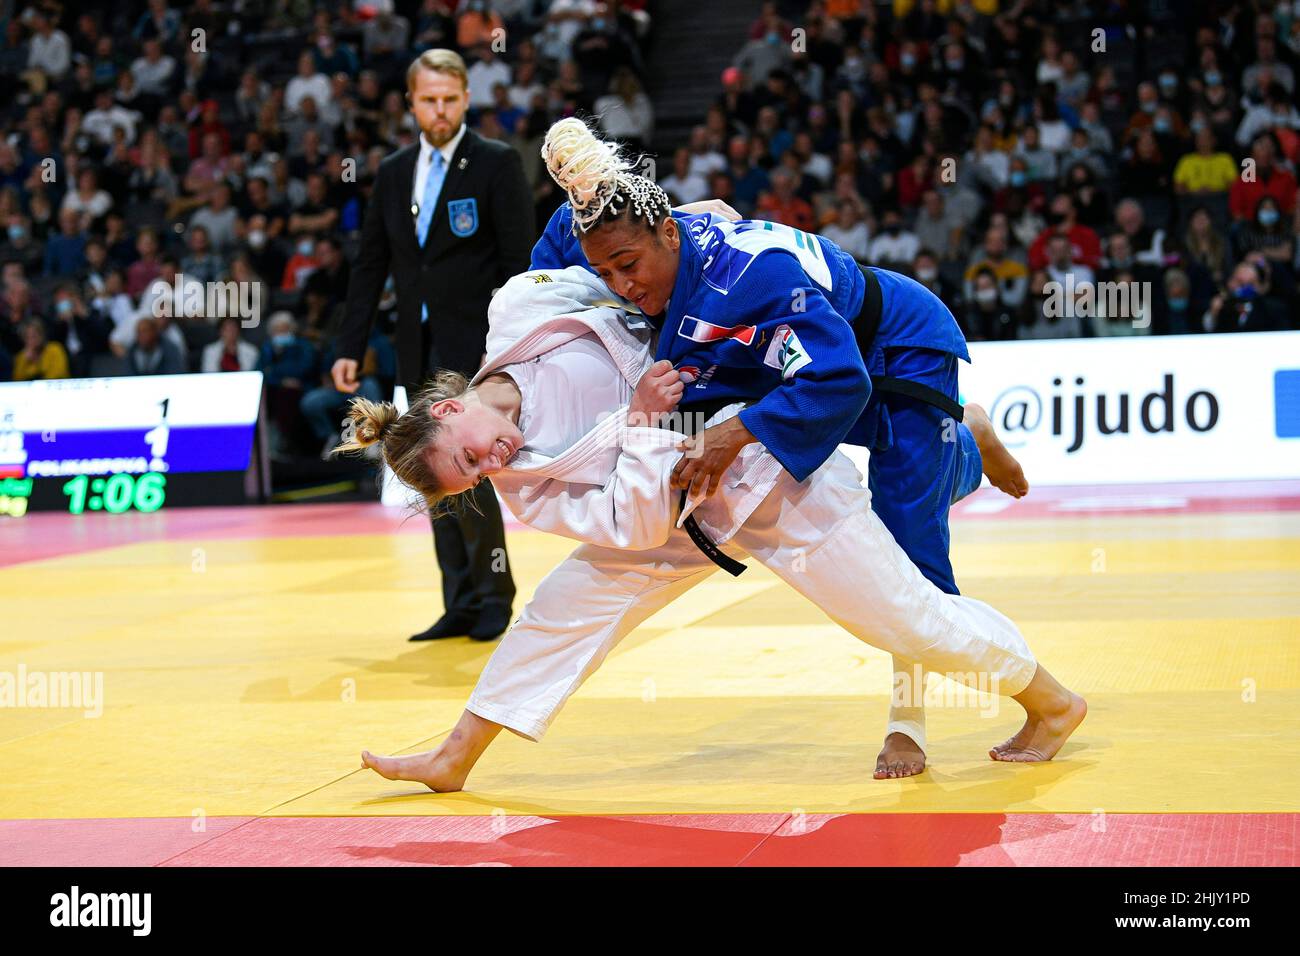 Women -57 kg, Caroline FRITZE (white) of Germany Silver medal and Martha FAWAZ (blue) of France compete during the Paris Grand Slam 2021, Judo event o Stock Photo